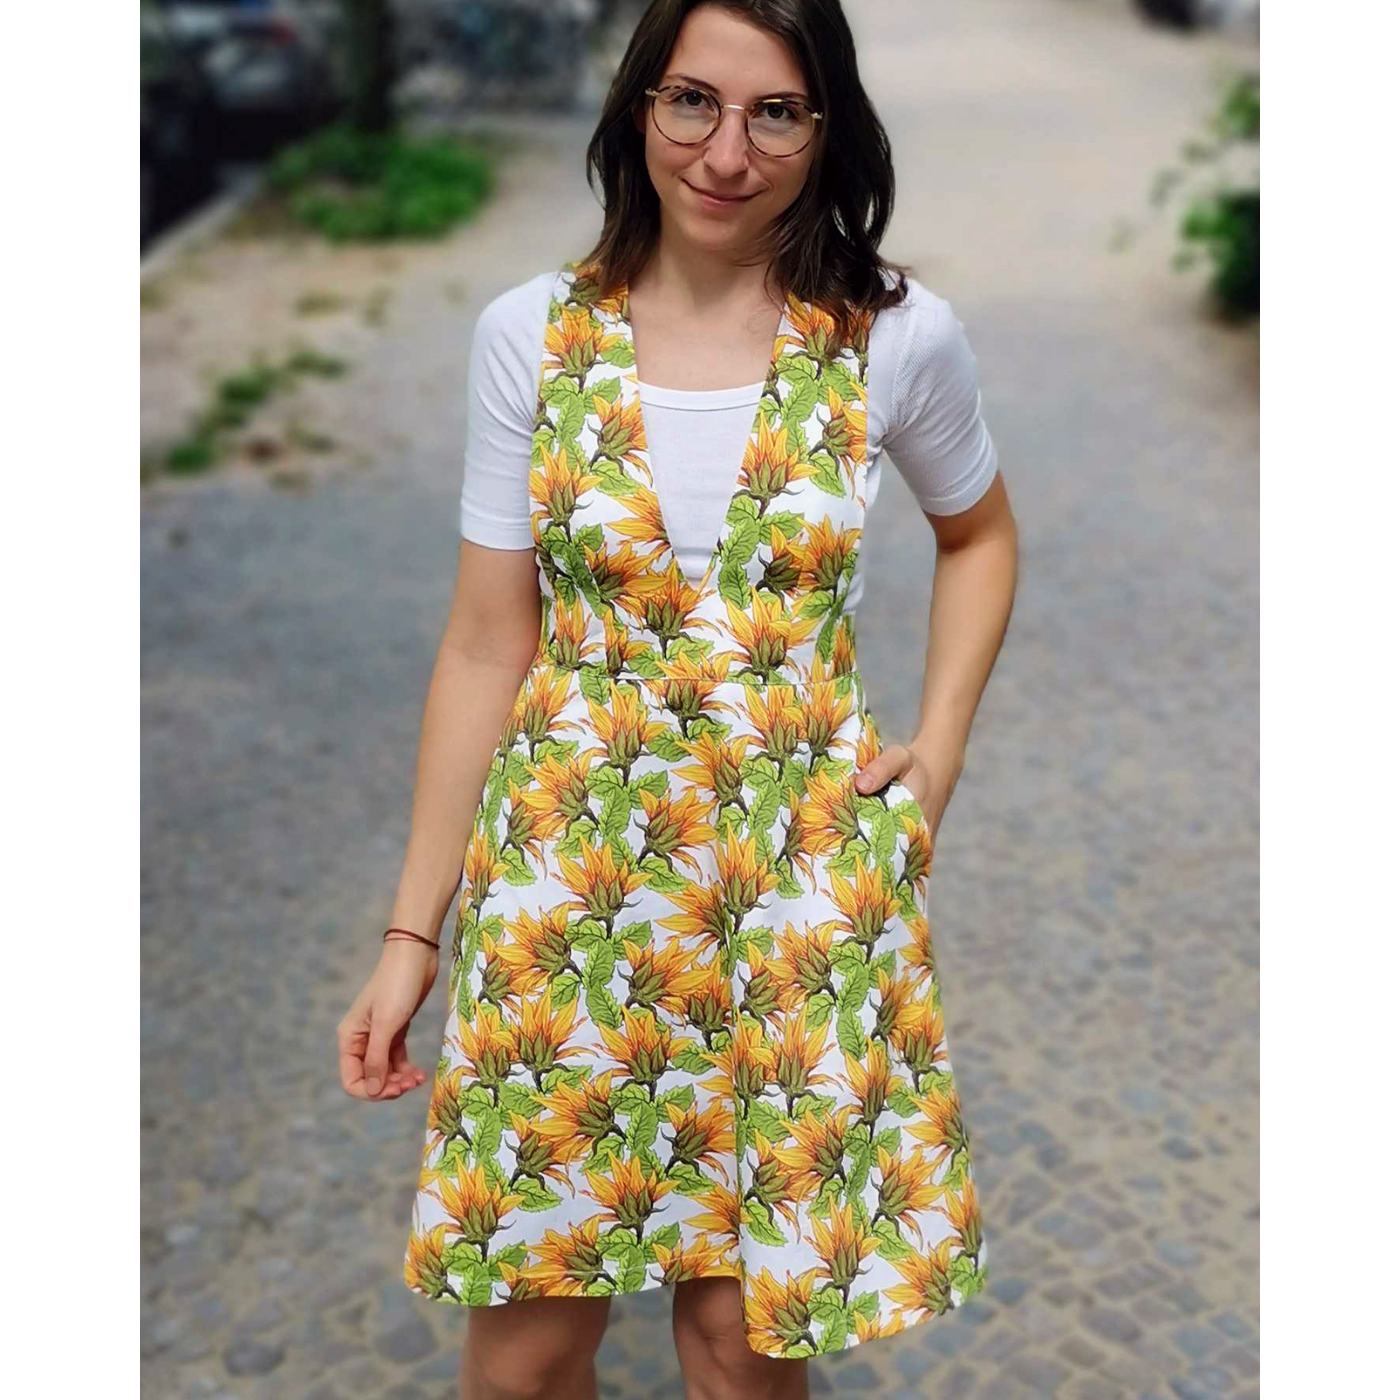 Maike stands looking at the camera with her left hand in her pocket. She is wearing a pinafore with a white background and sunflower design and a short-sleeve white shirt underneath.